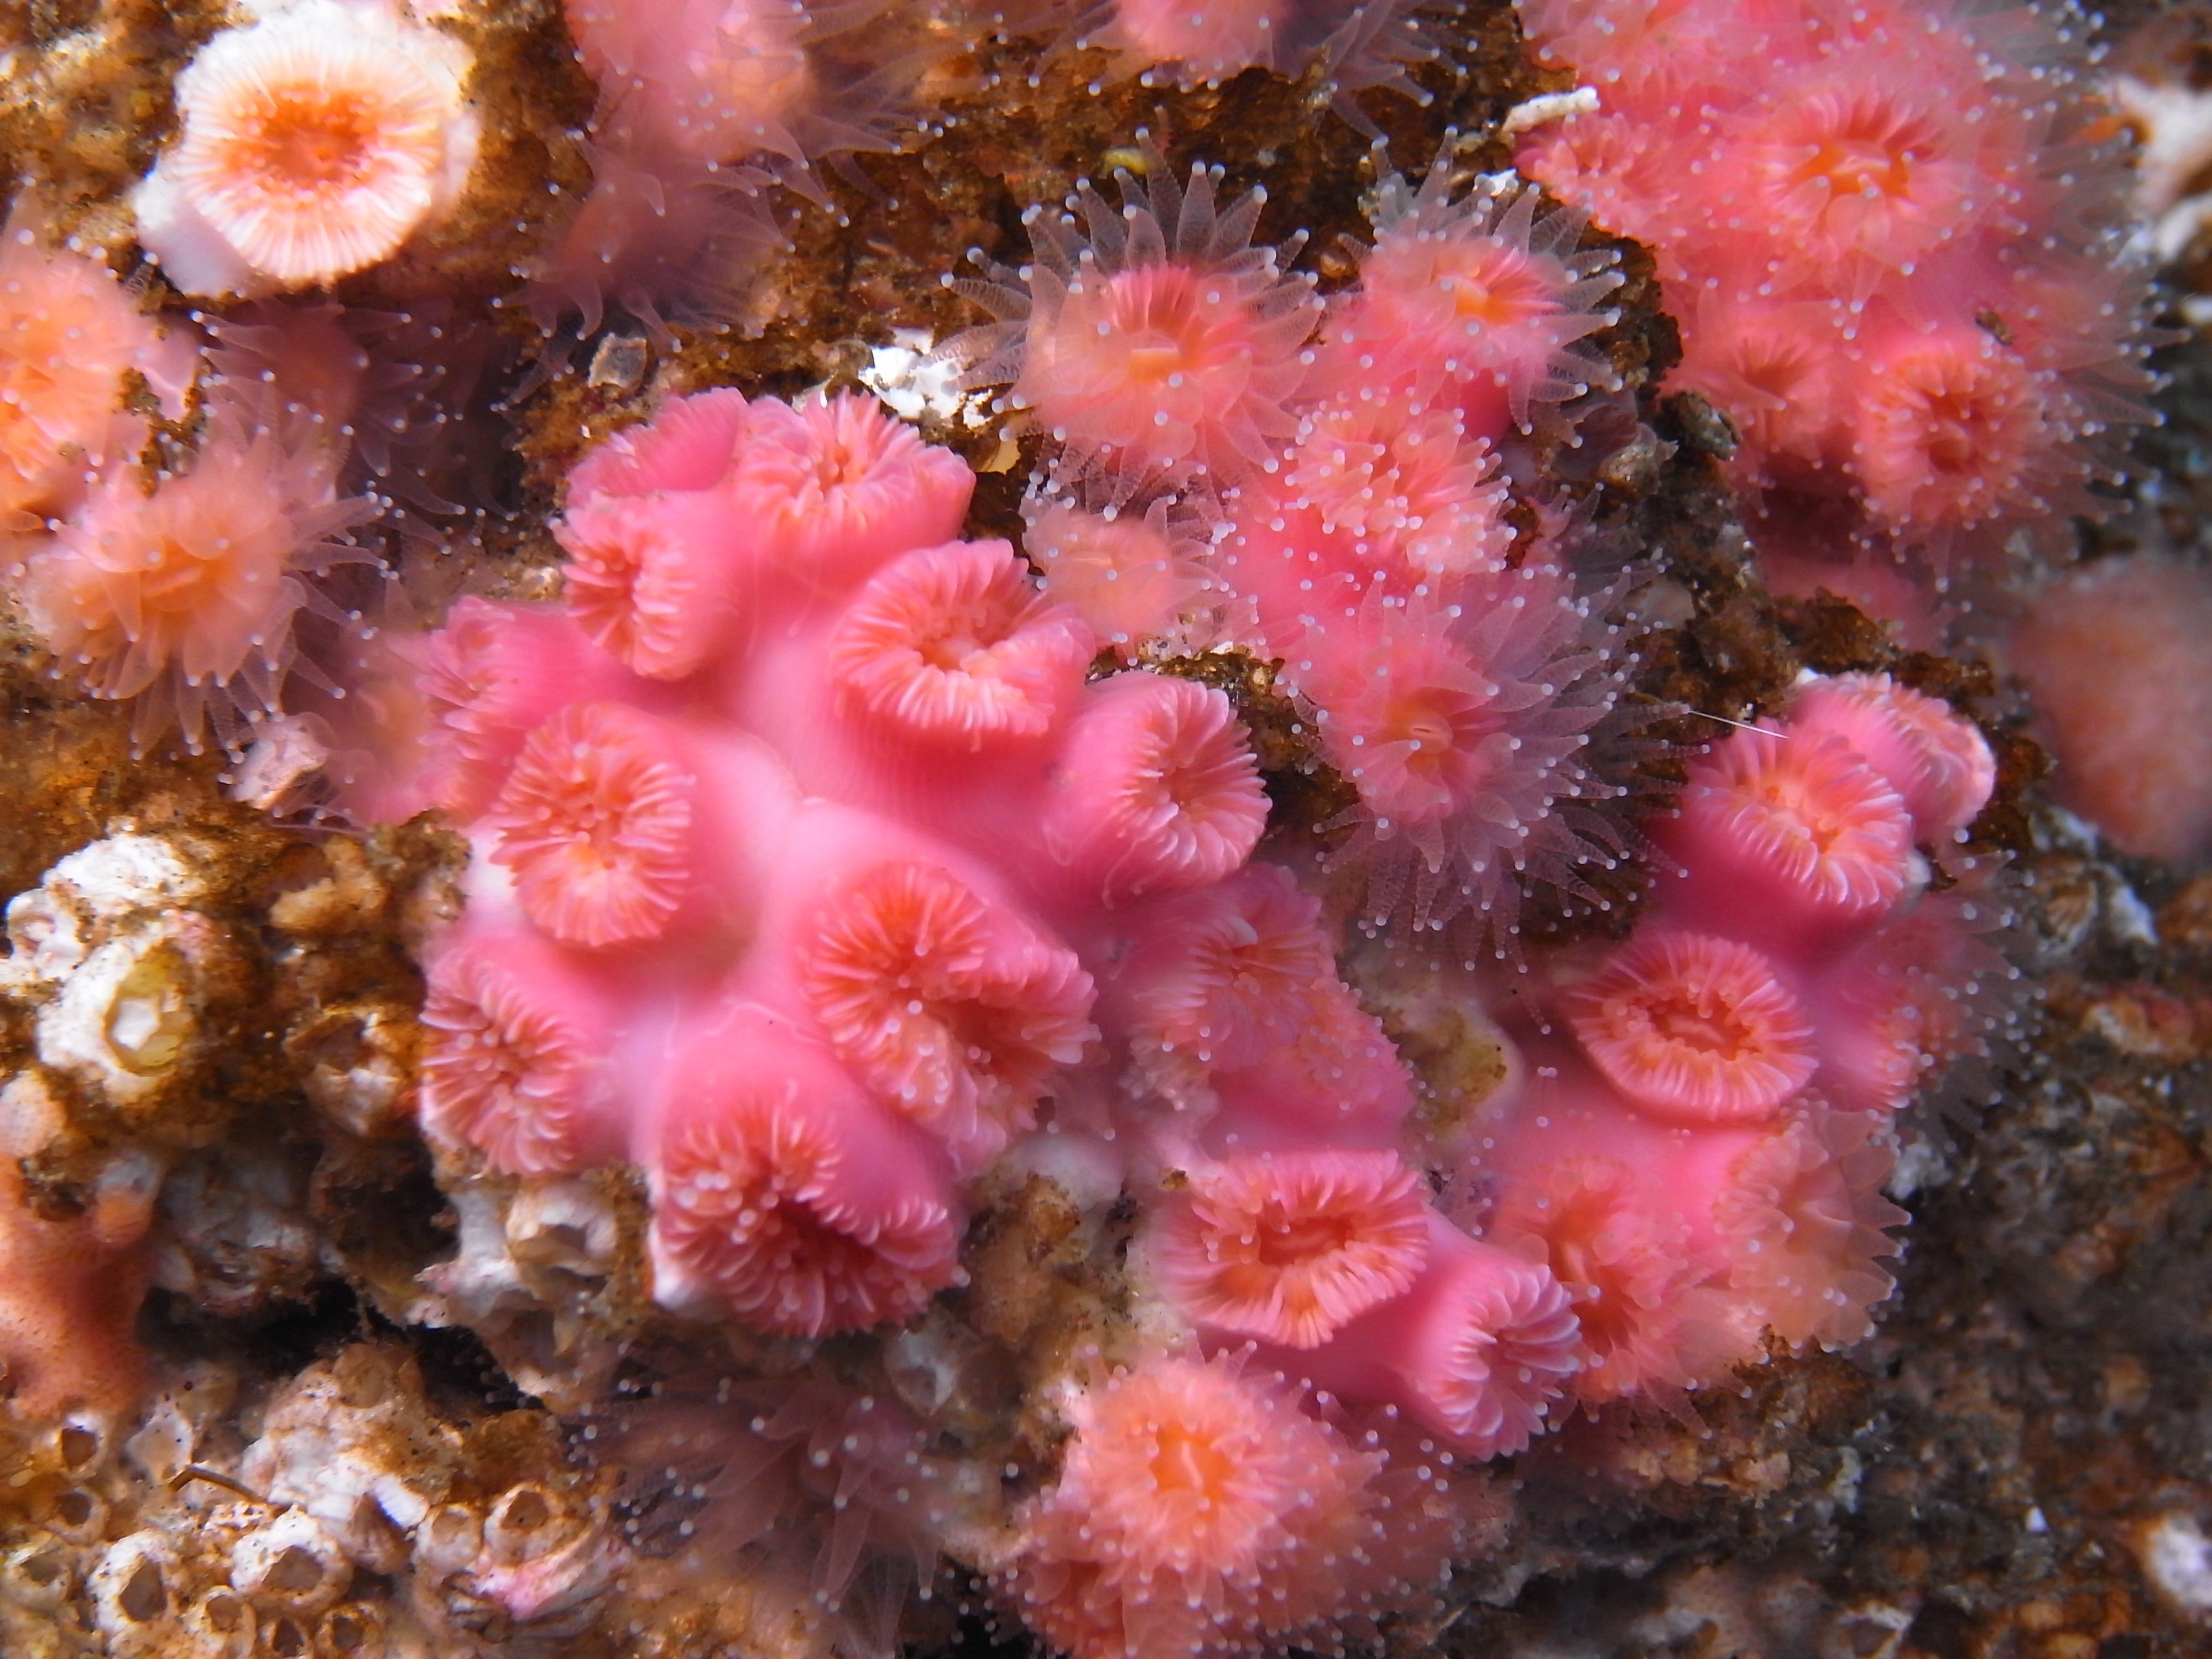 The Flower Animals of California: All About Stony Corals